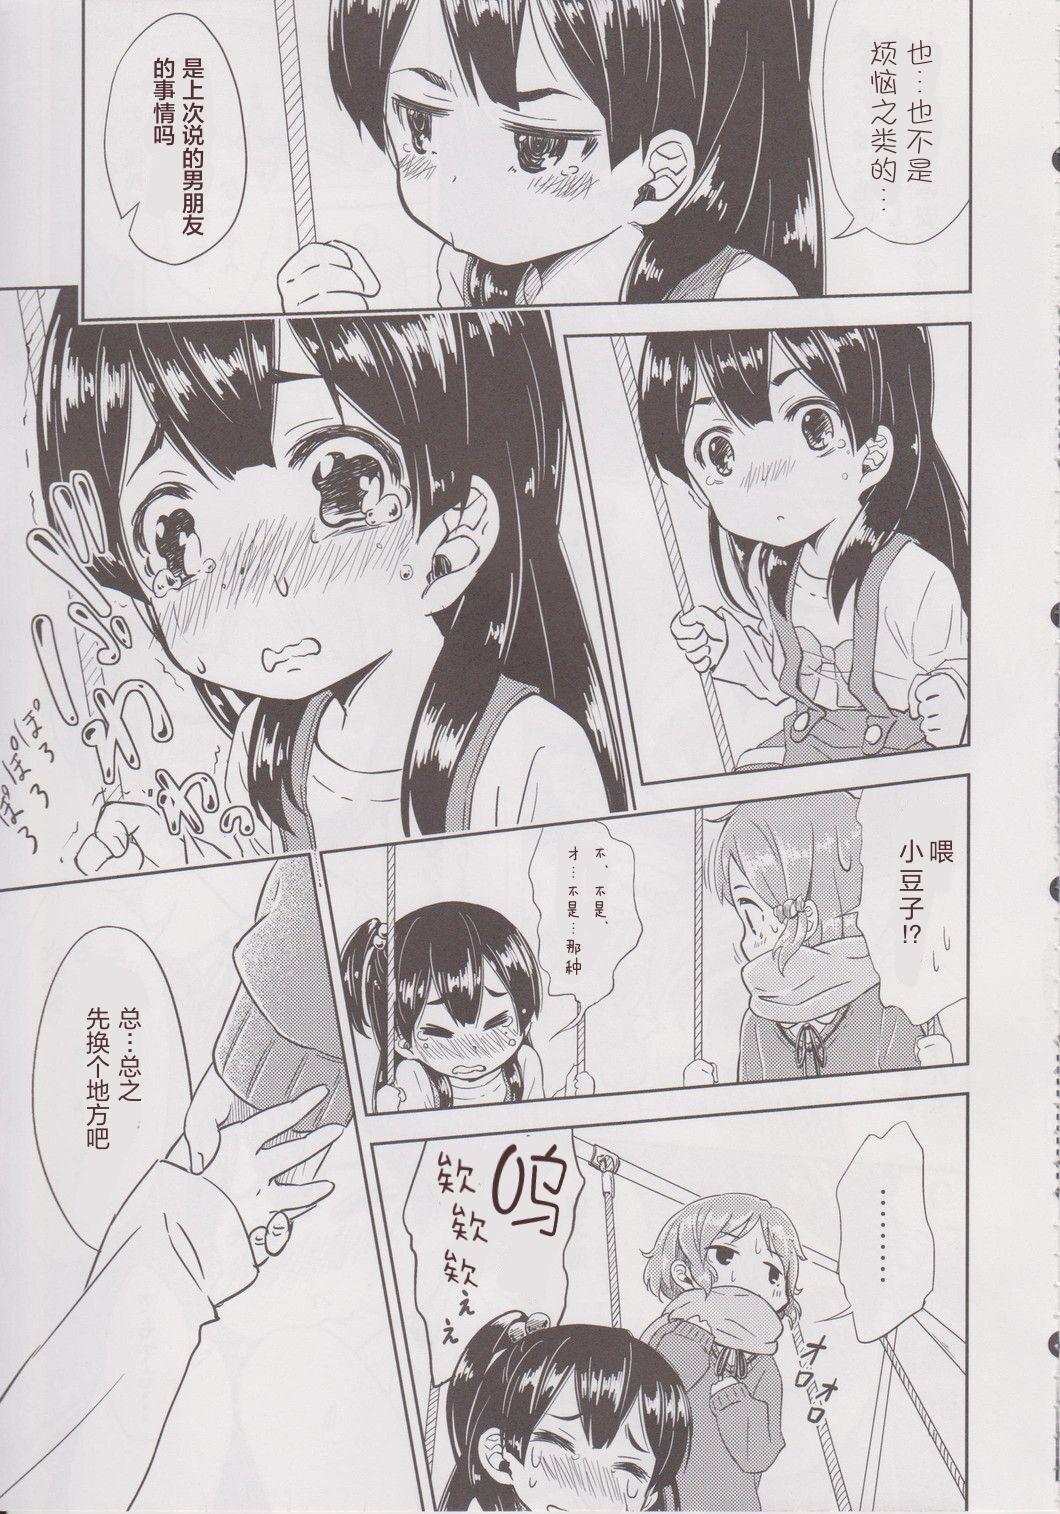 Asses Lovely Girls' Lily vol. 6 - Tamako market Relax - Page 6